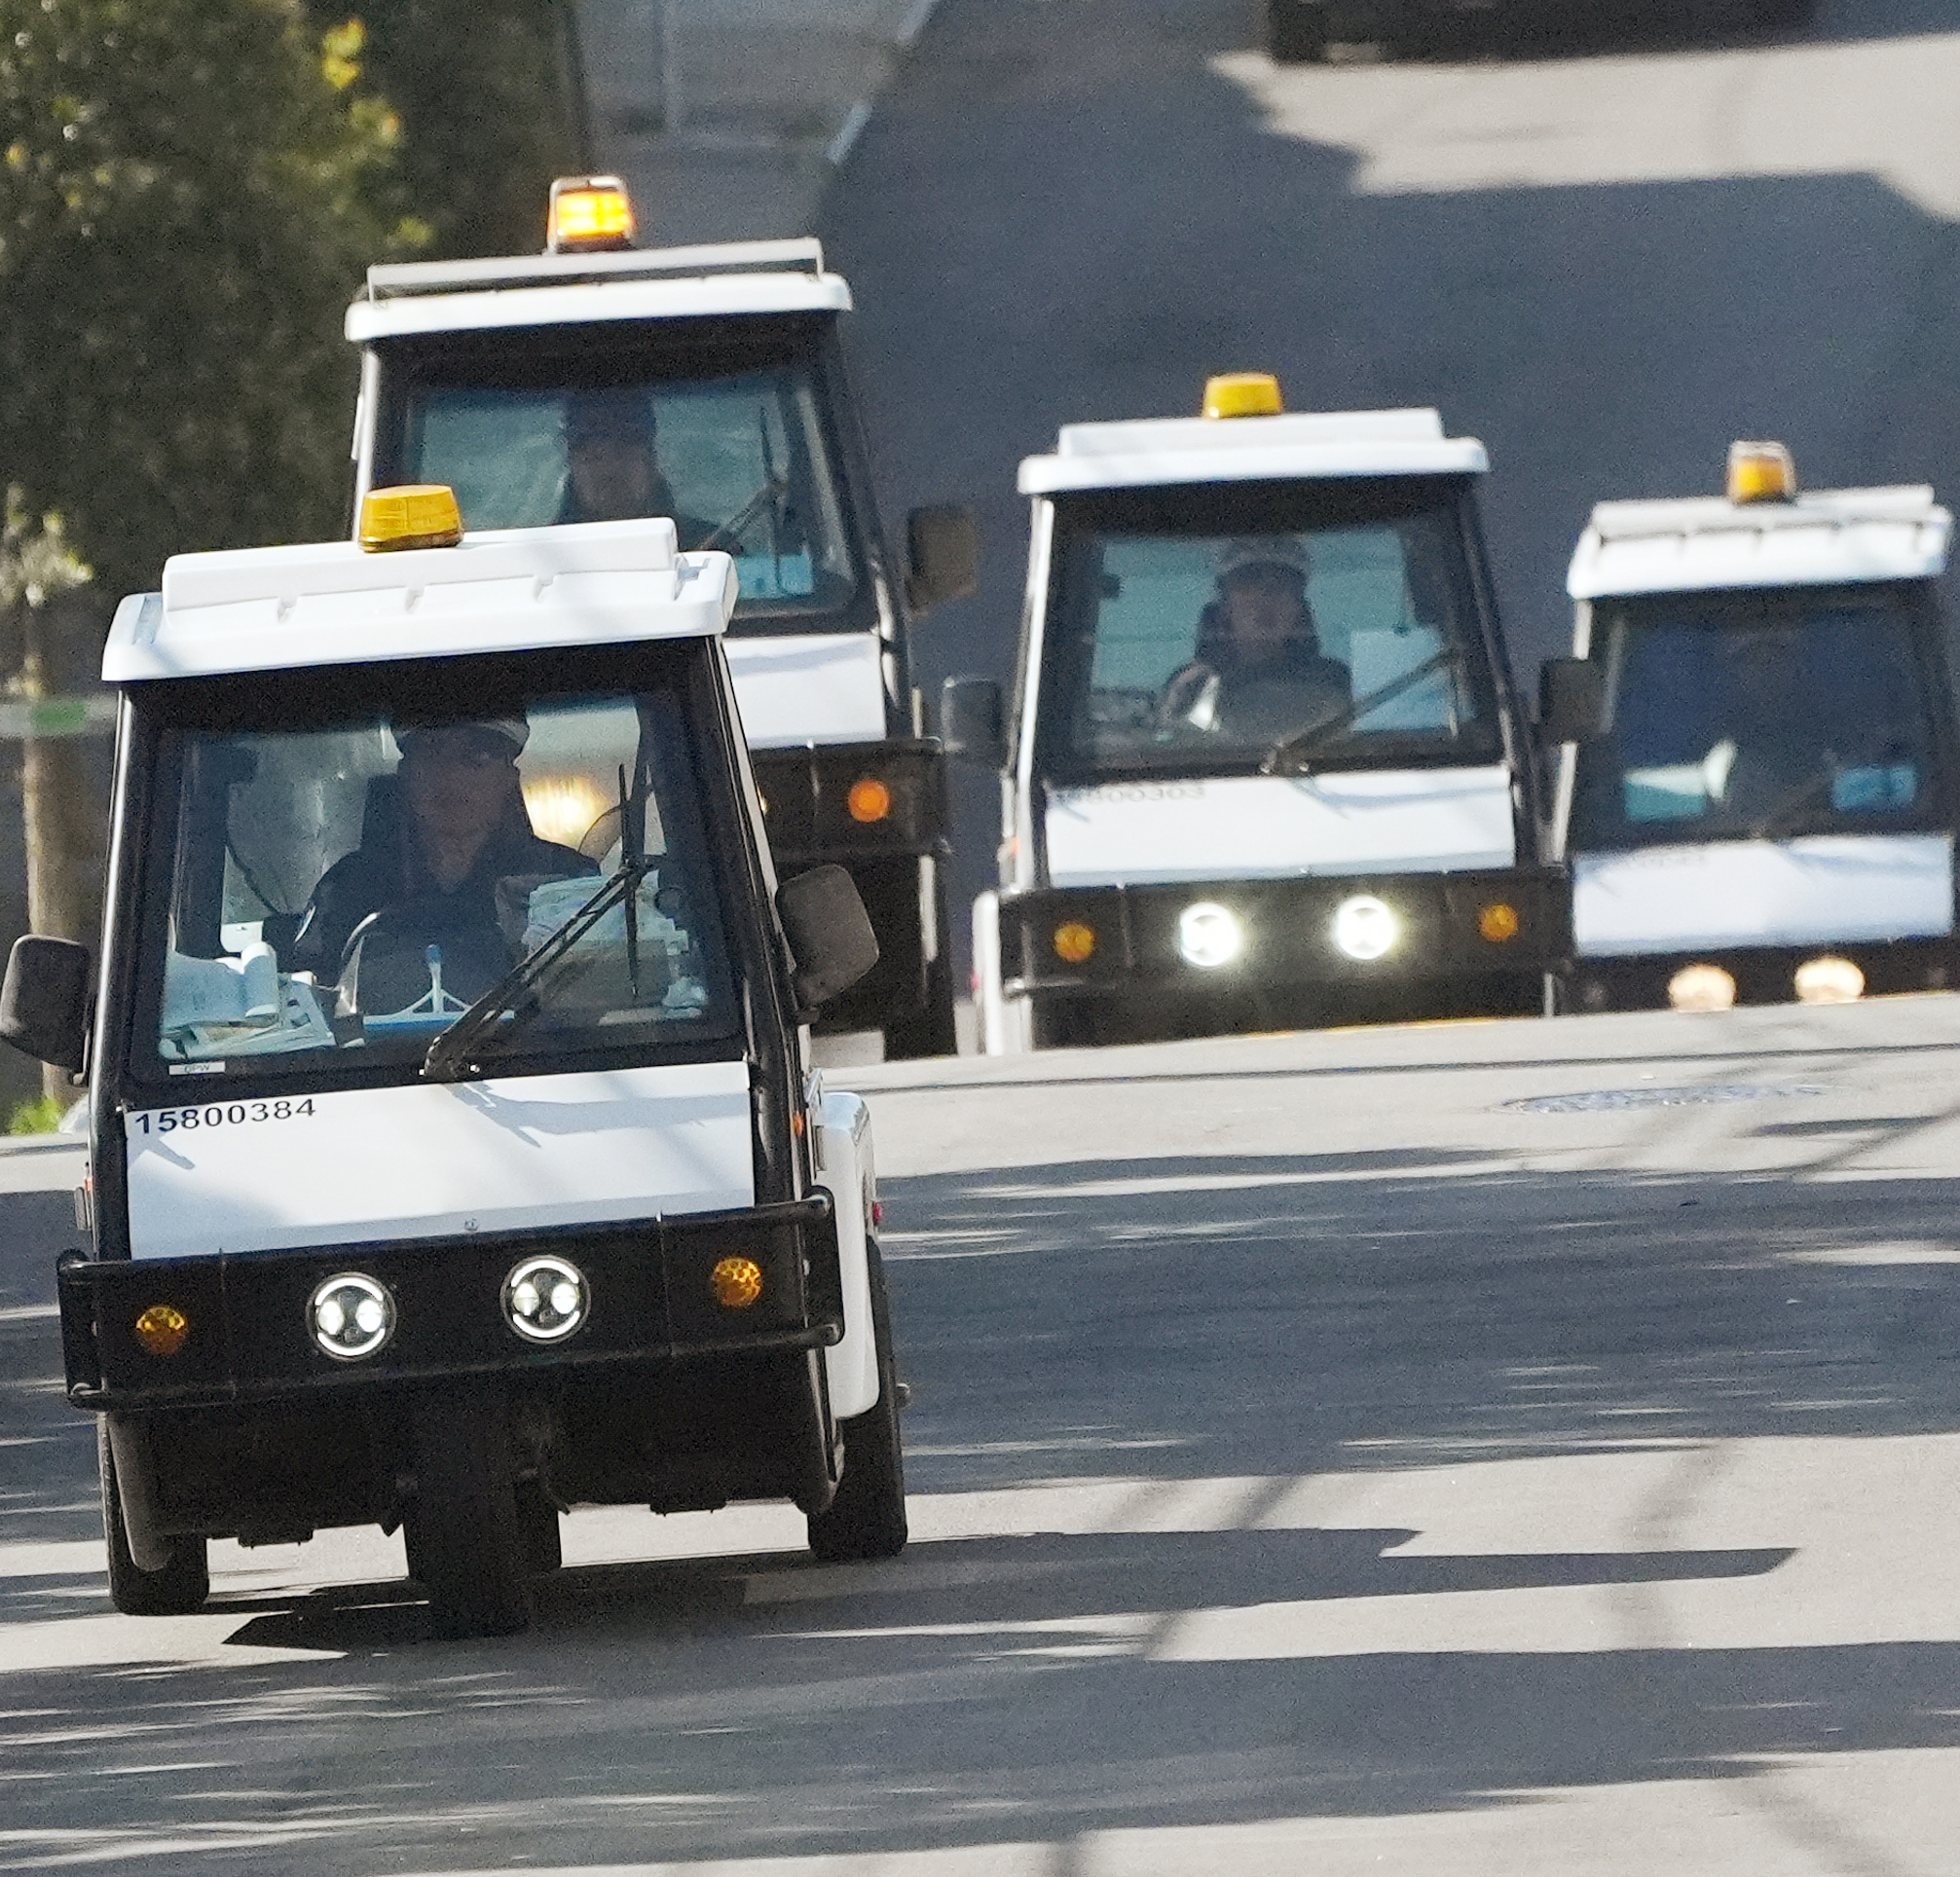 A convoy of small white utility vehicles, each with an amber light on top, drives down a road.